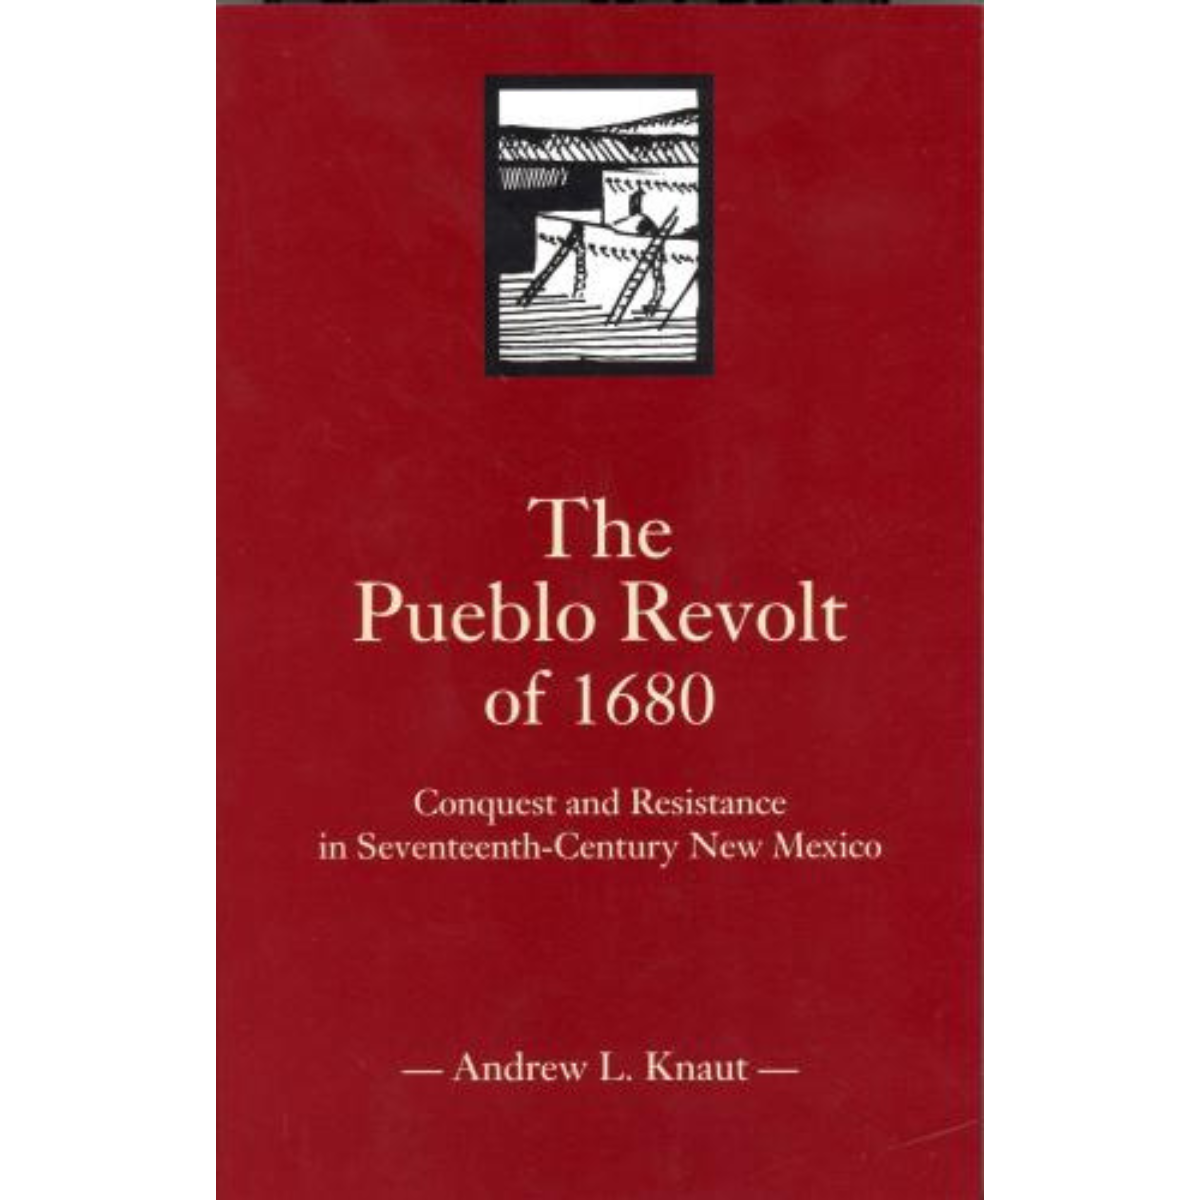 The Pueblo Revolt of 1680 - Conquest and Resistance in 17th Century New Mexico